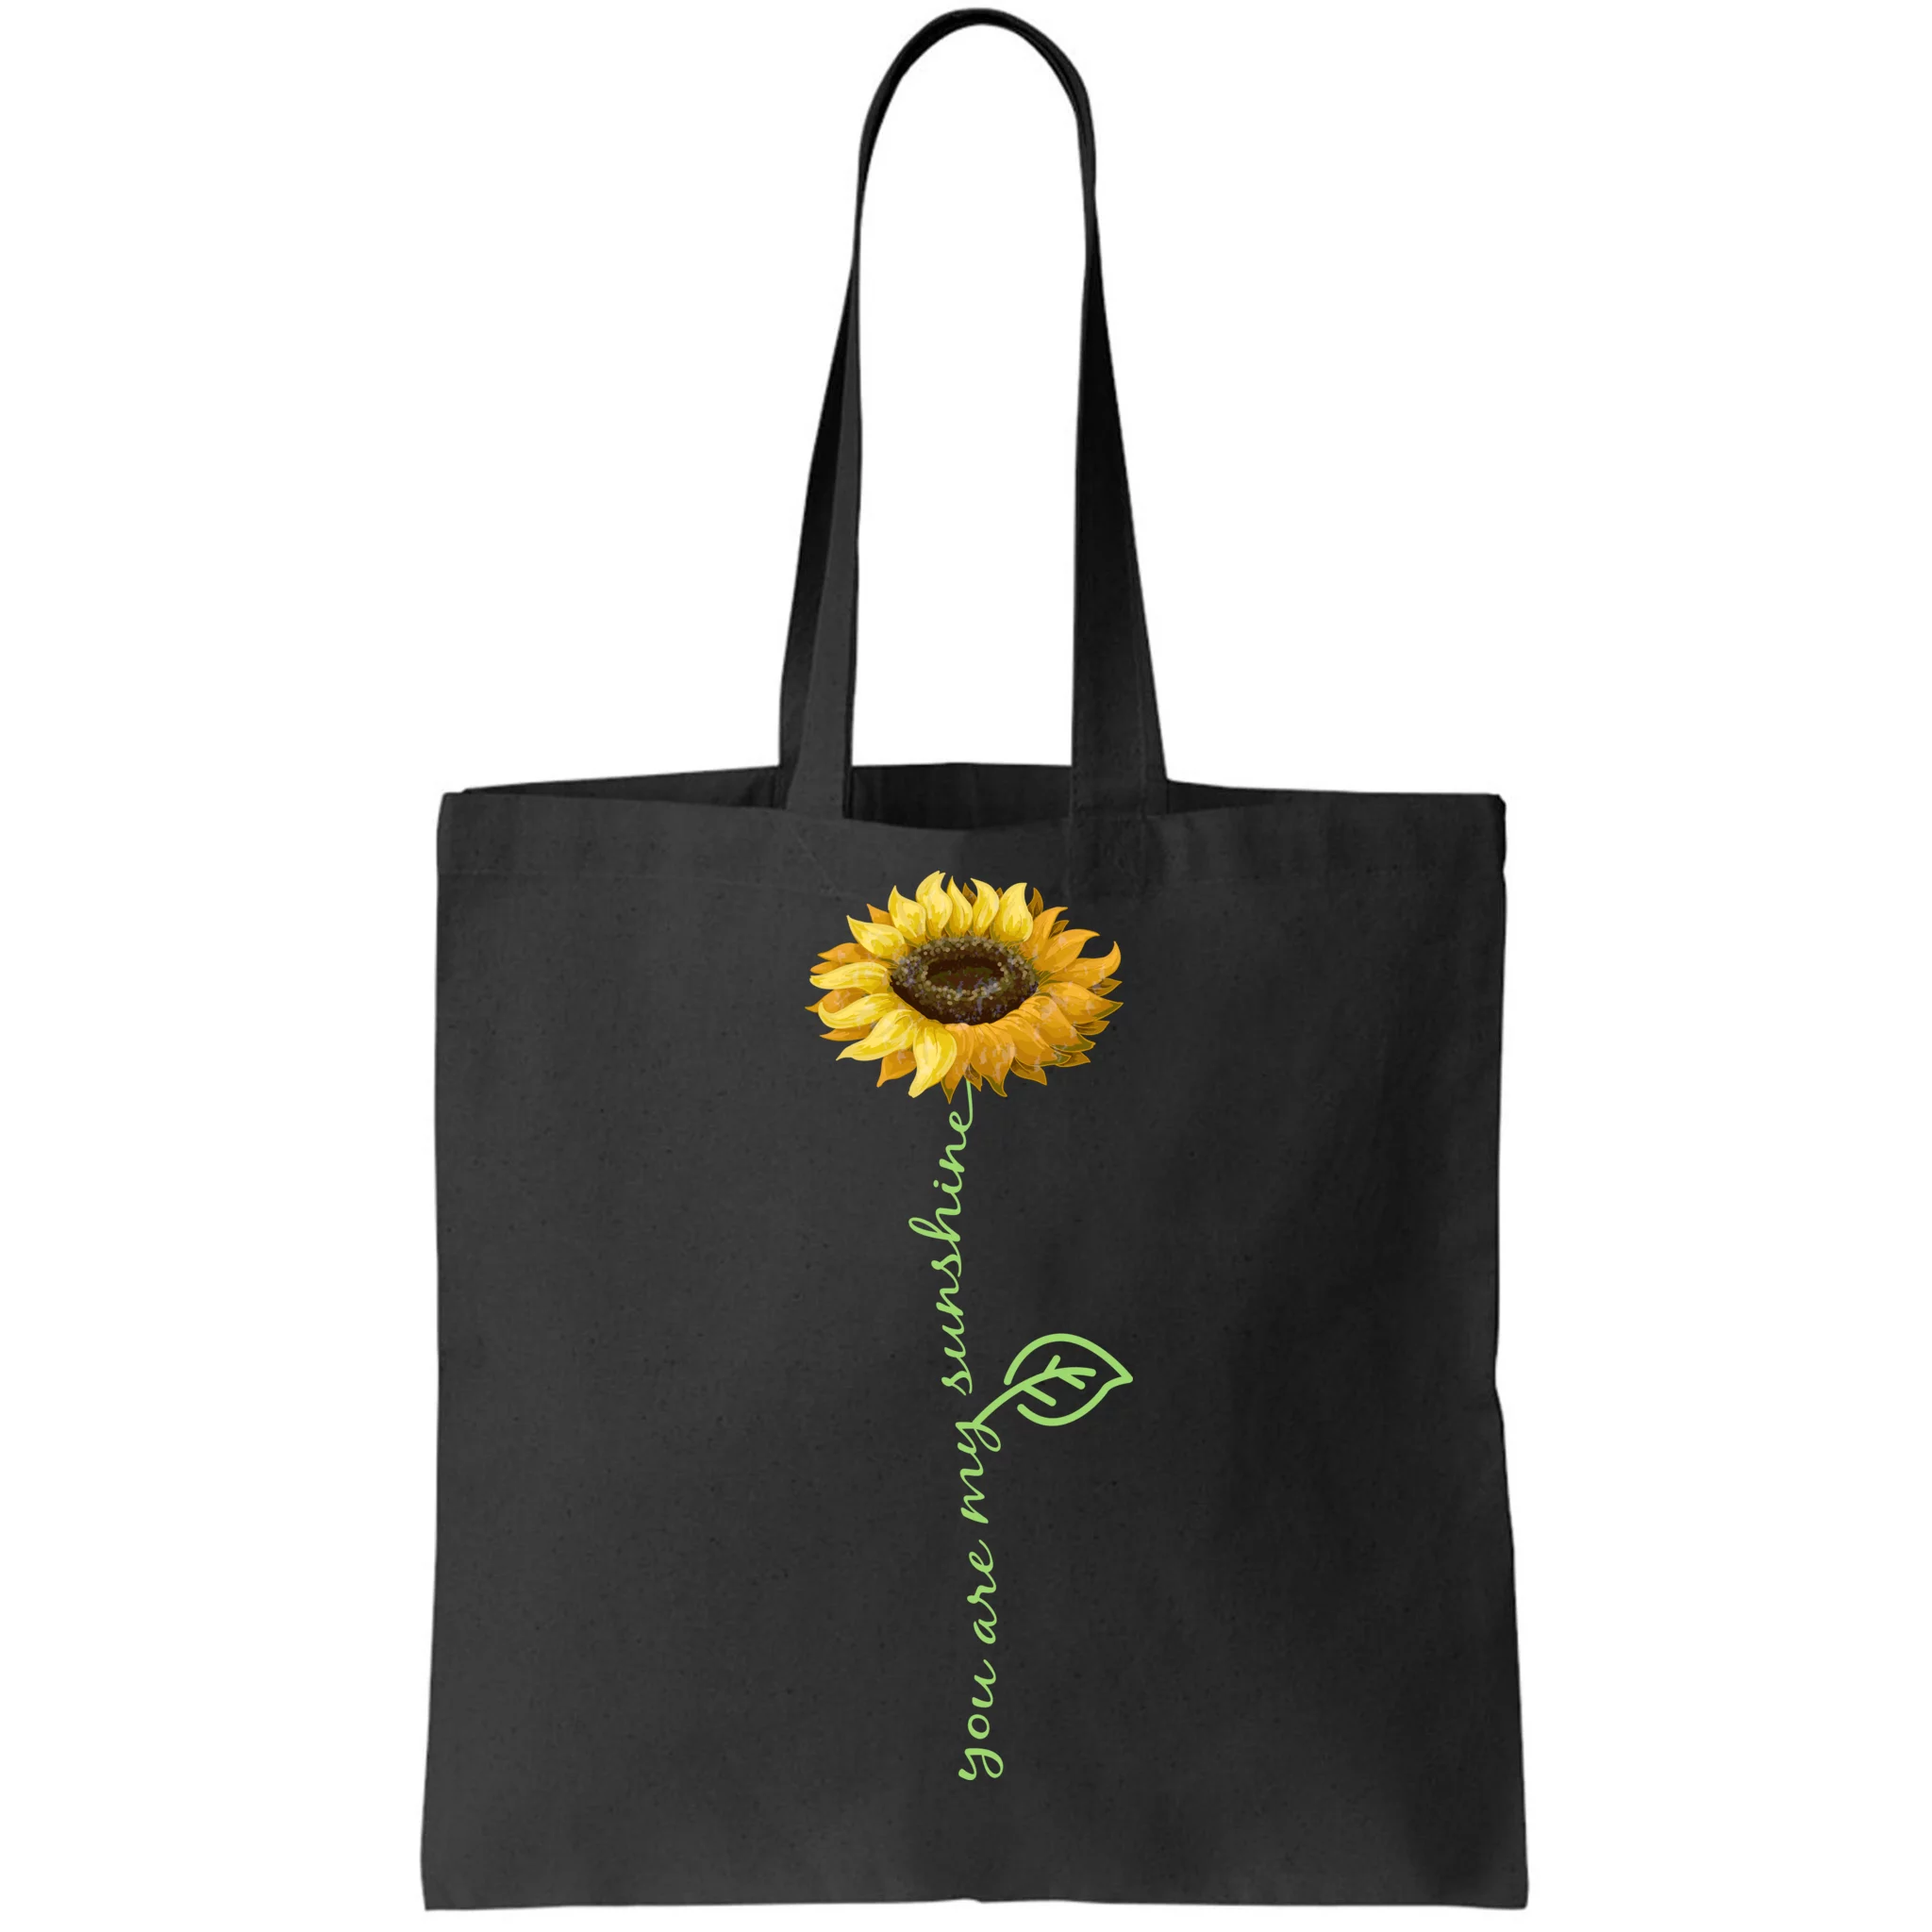 Sunflowers Recycled Bag | Van Gogh | Recycled Tote Bags - LOQI GmbH